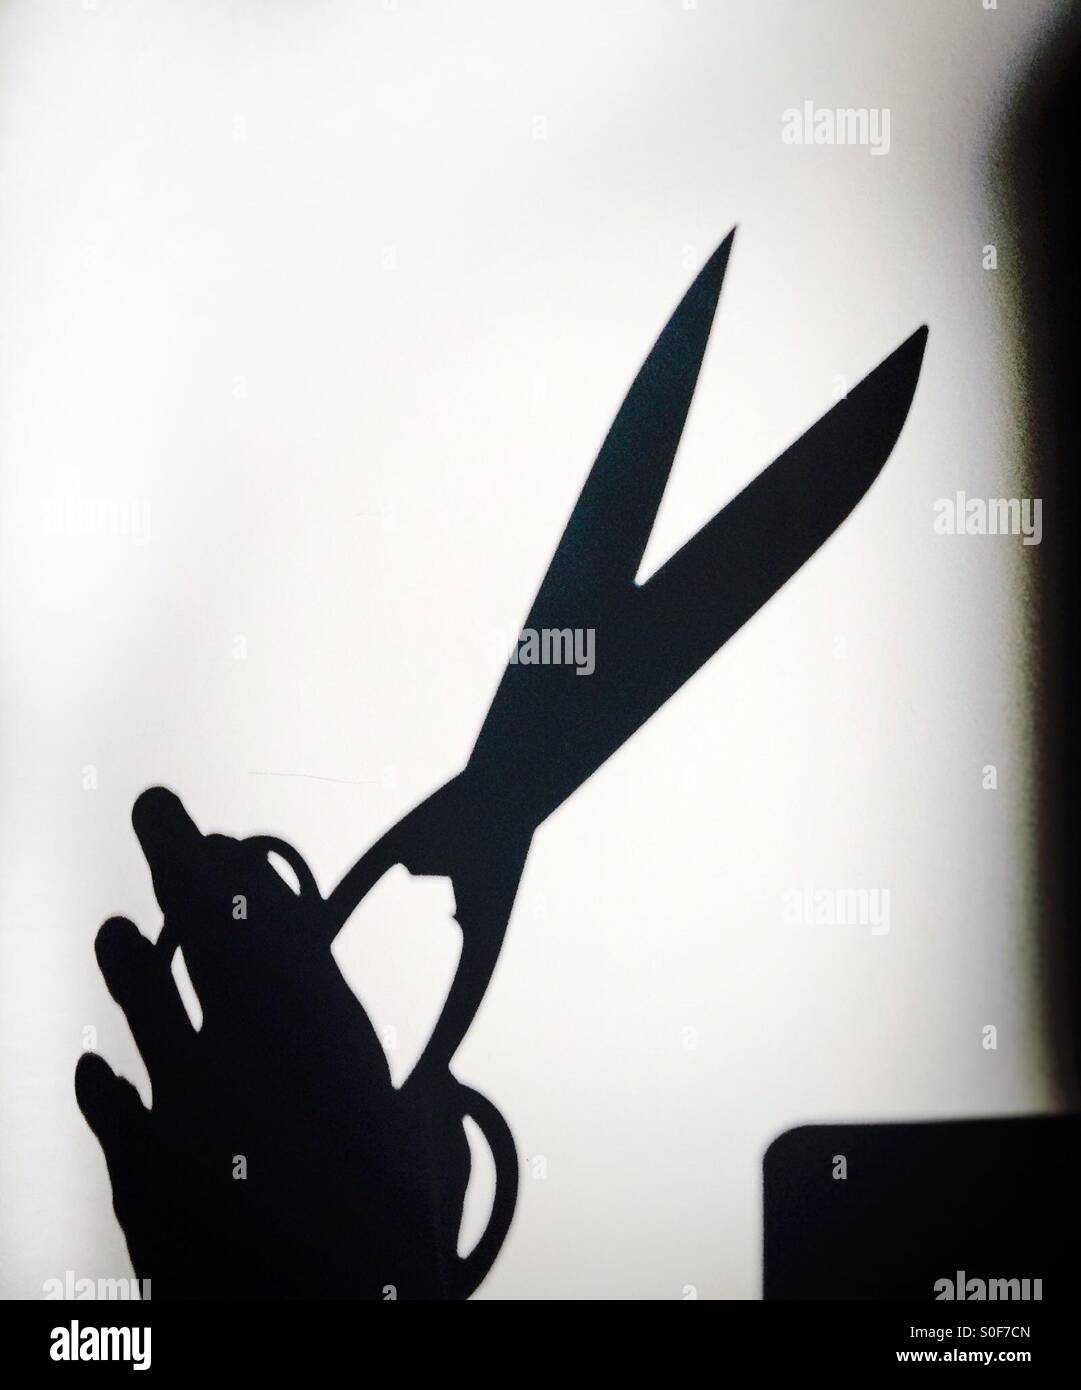 Shadow of a scissors on white background Stock Photo